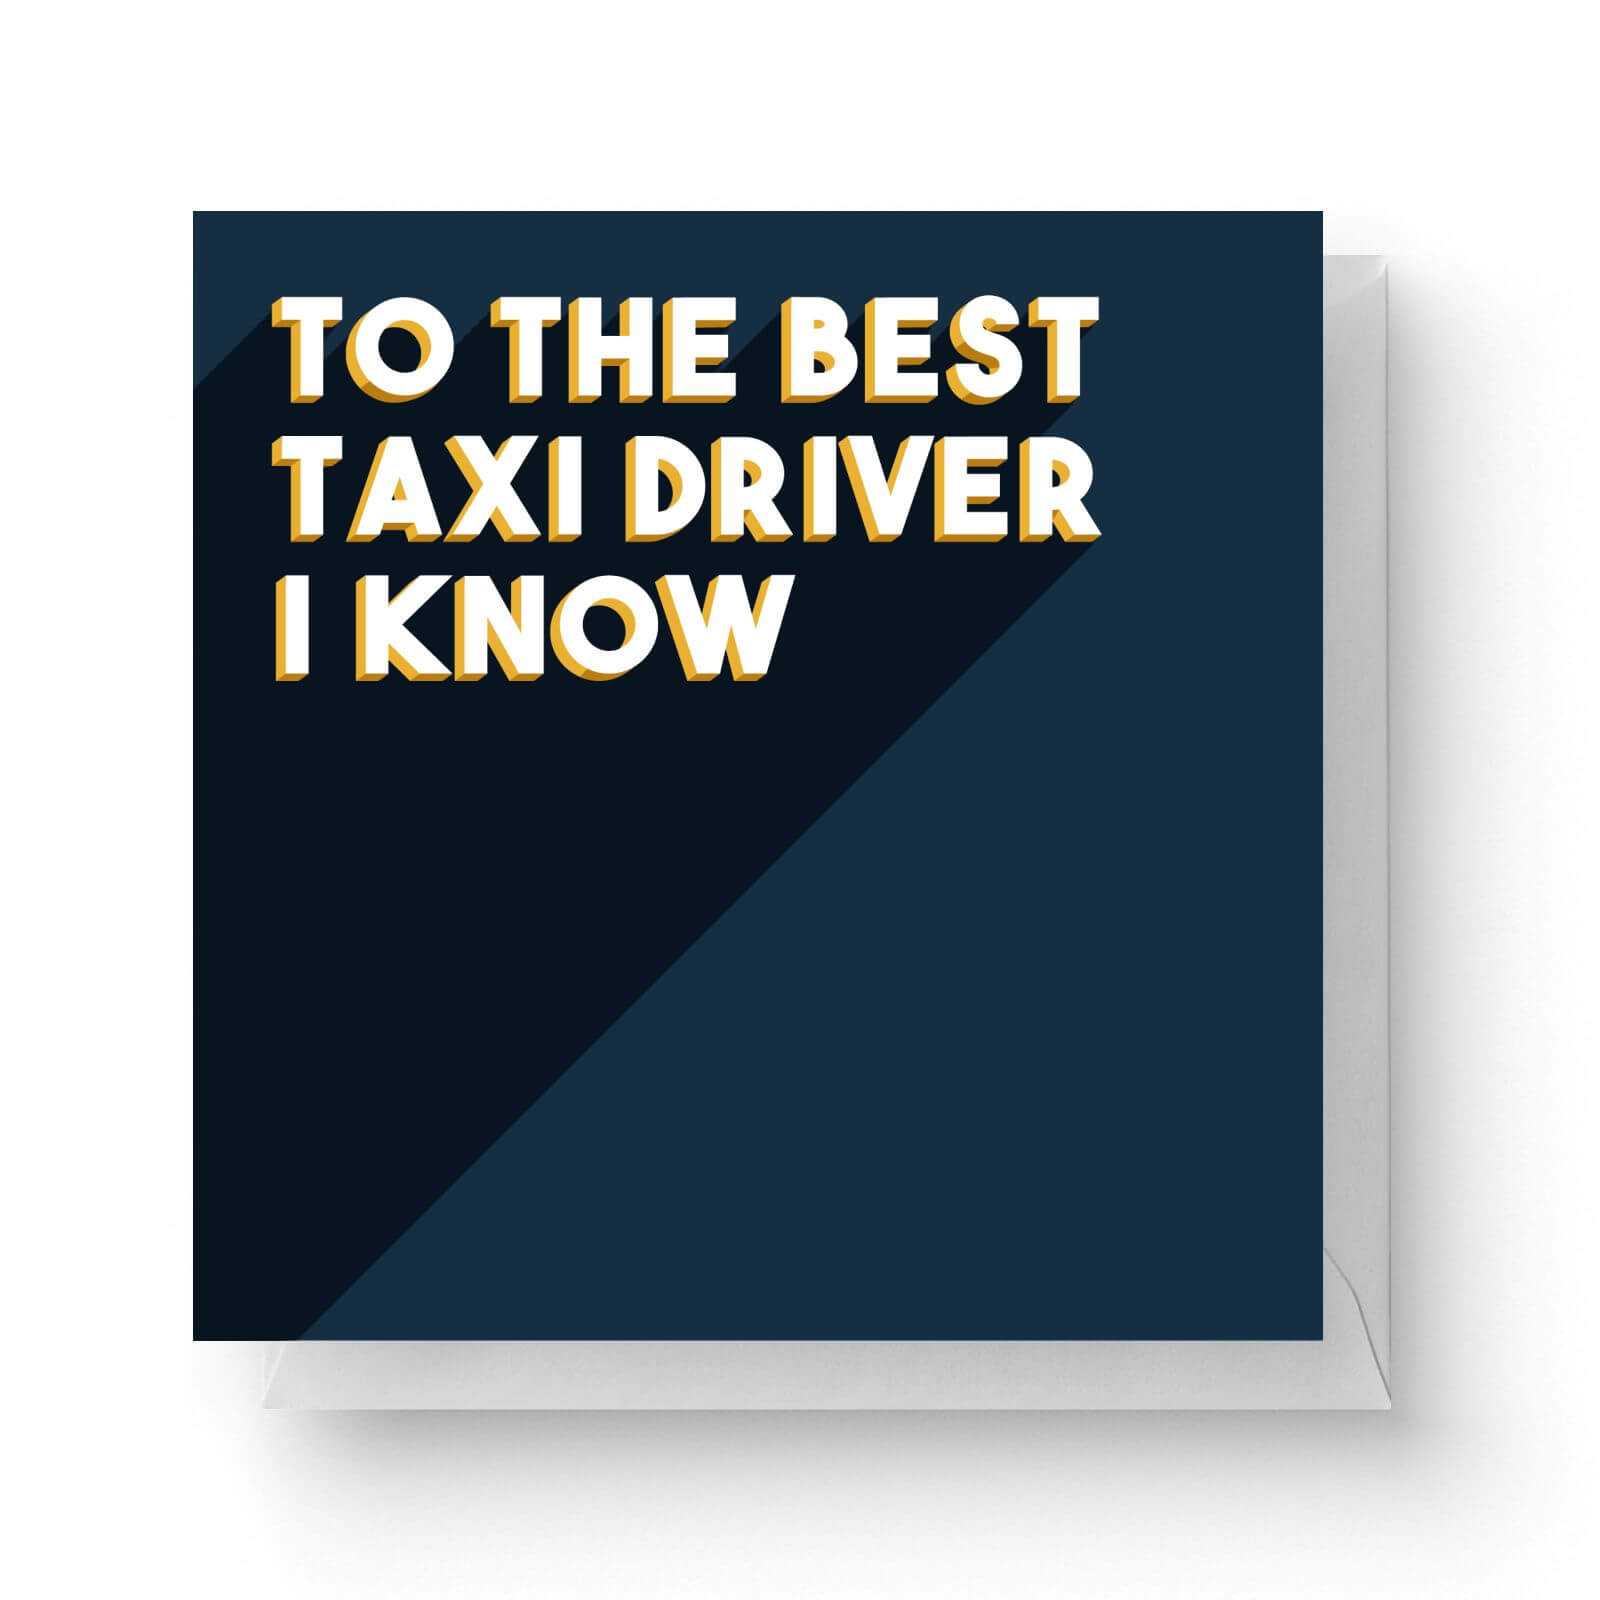 Image of To The Best Taxi Driver I Know Square Greetings Card (14.8cm x 14.8cm)